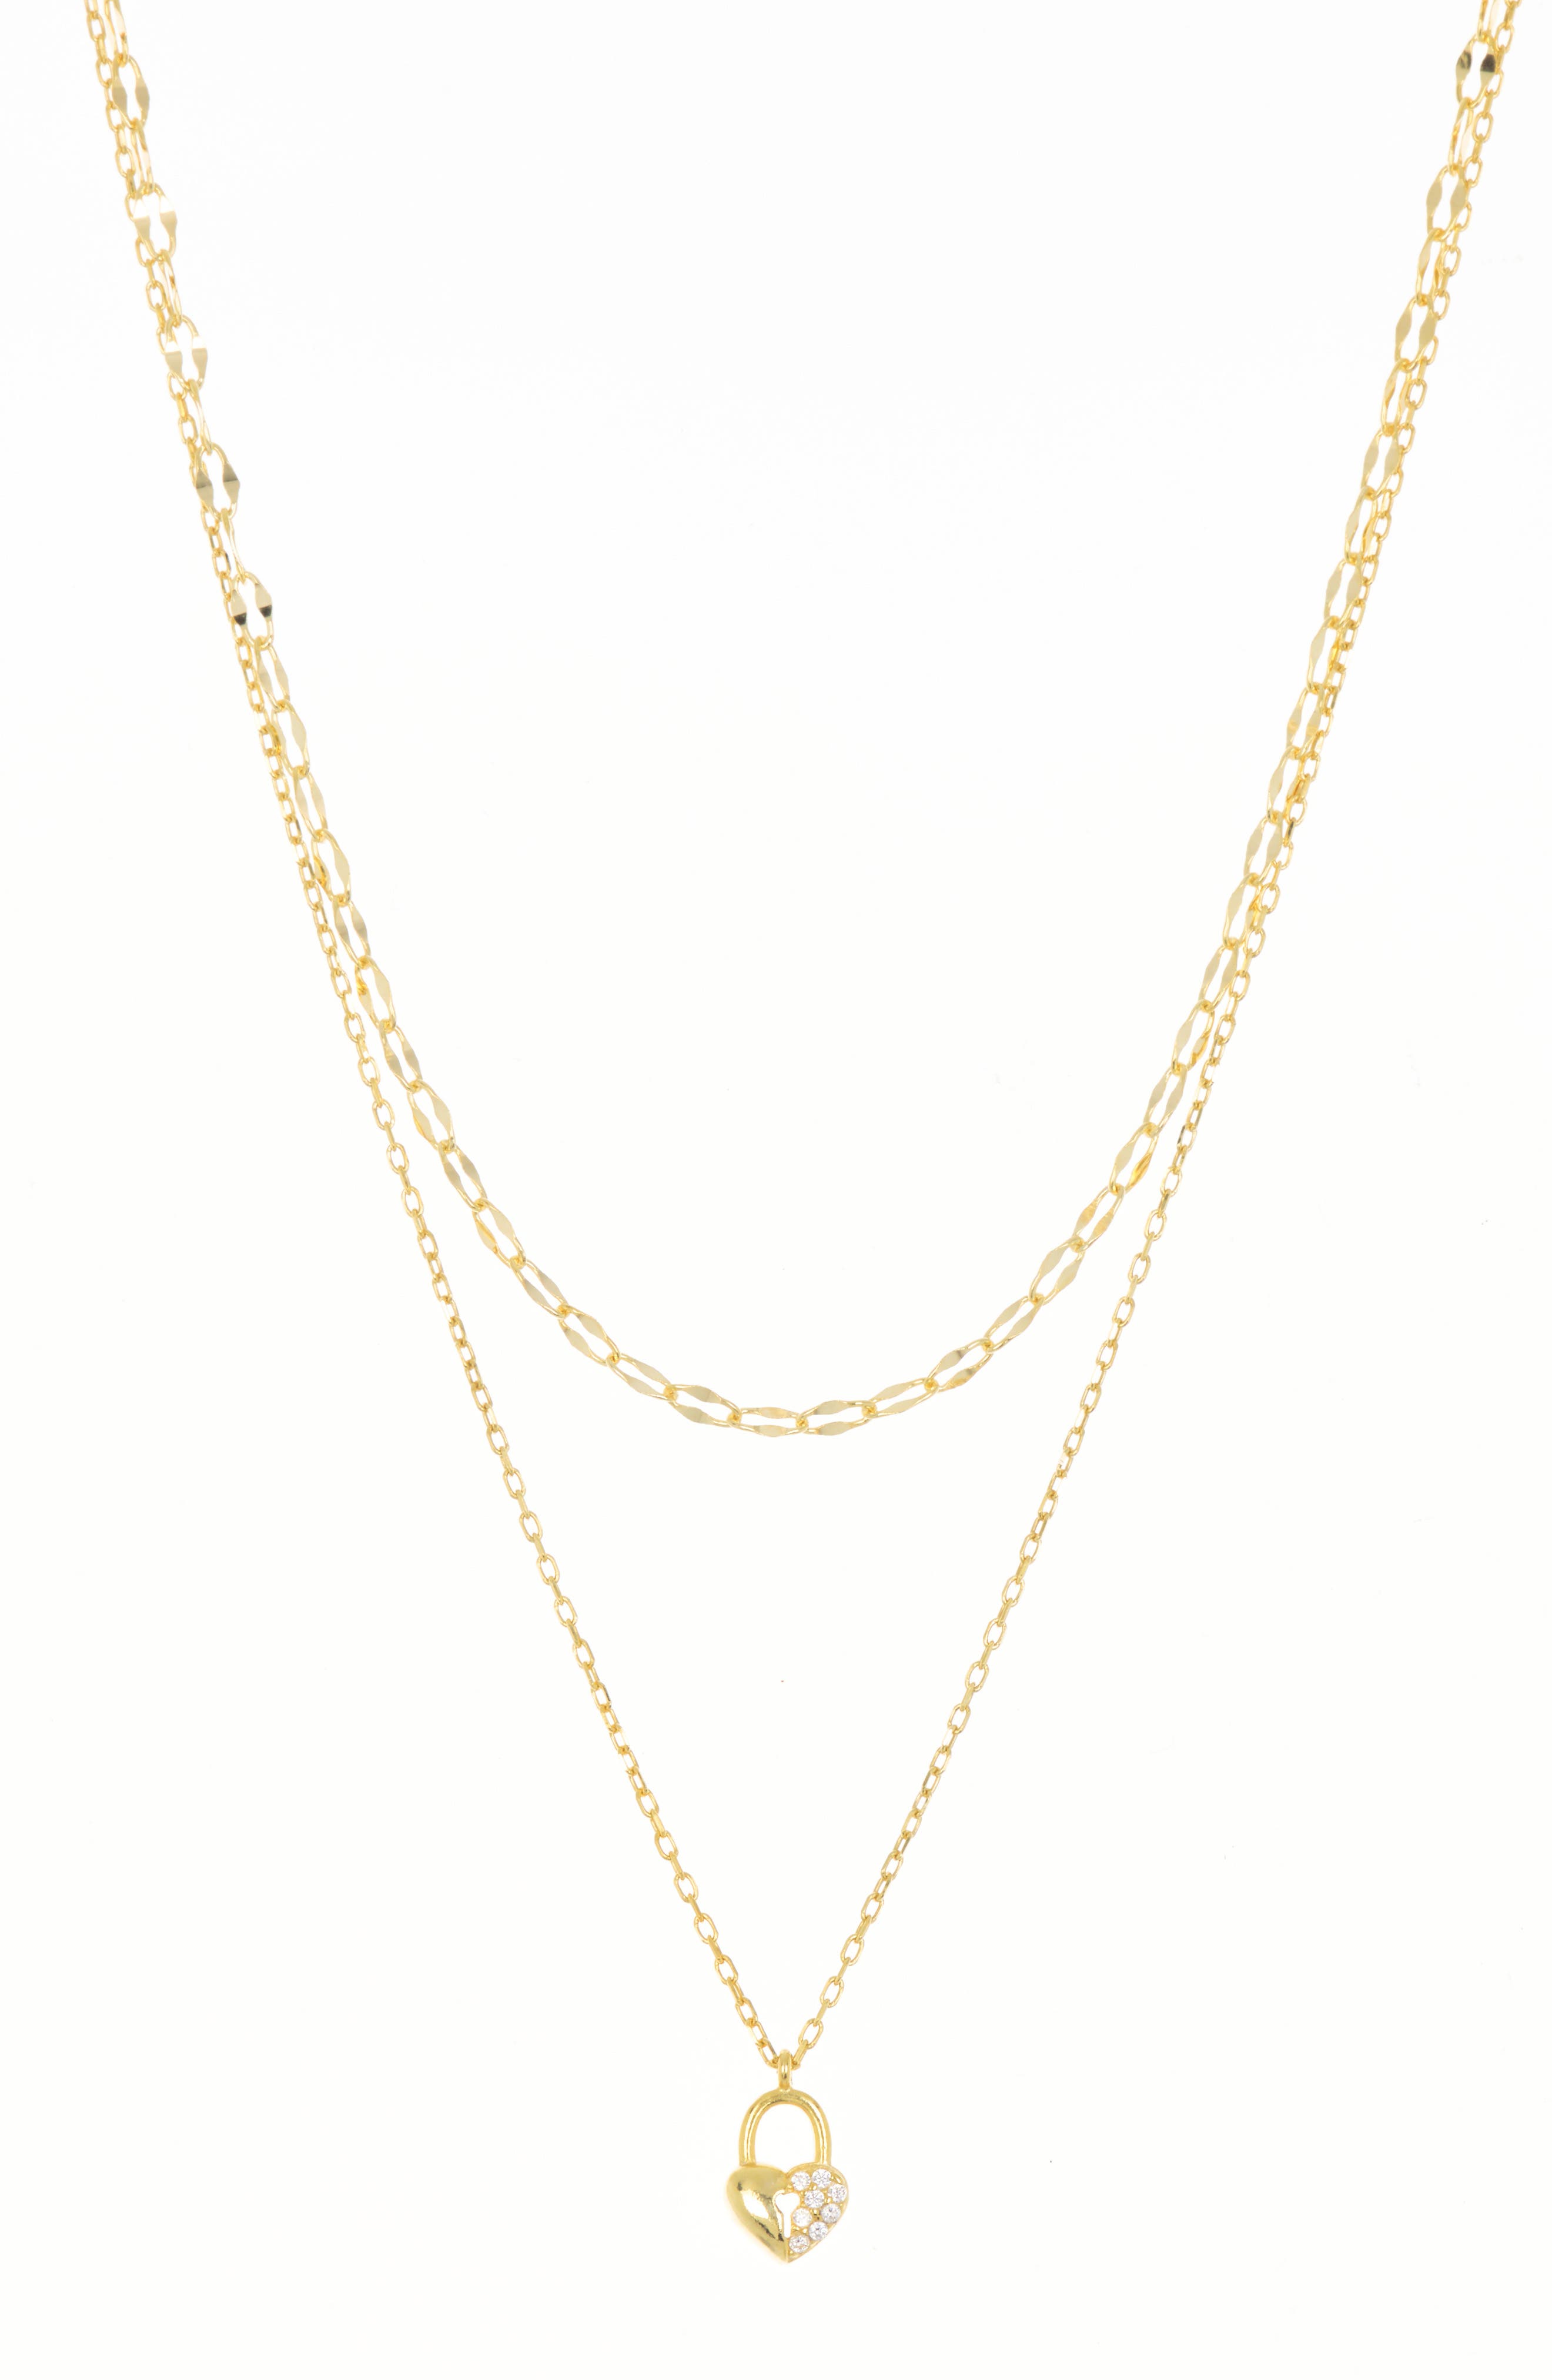 Argento Vivo 18k Yellow Gold Plated Pave Cz Lock Pendant Layered Chain Necklace